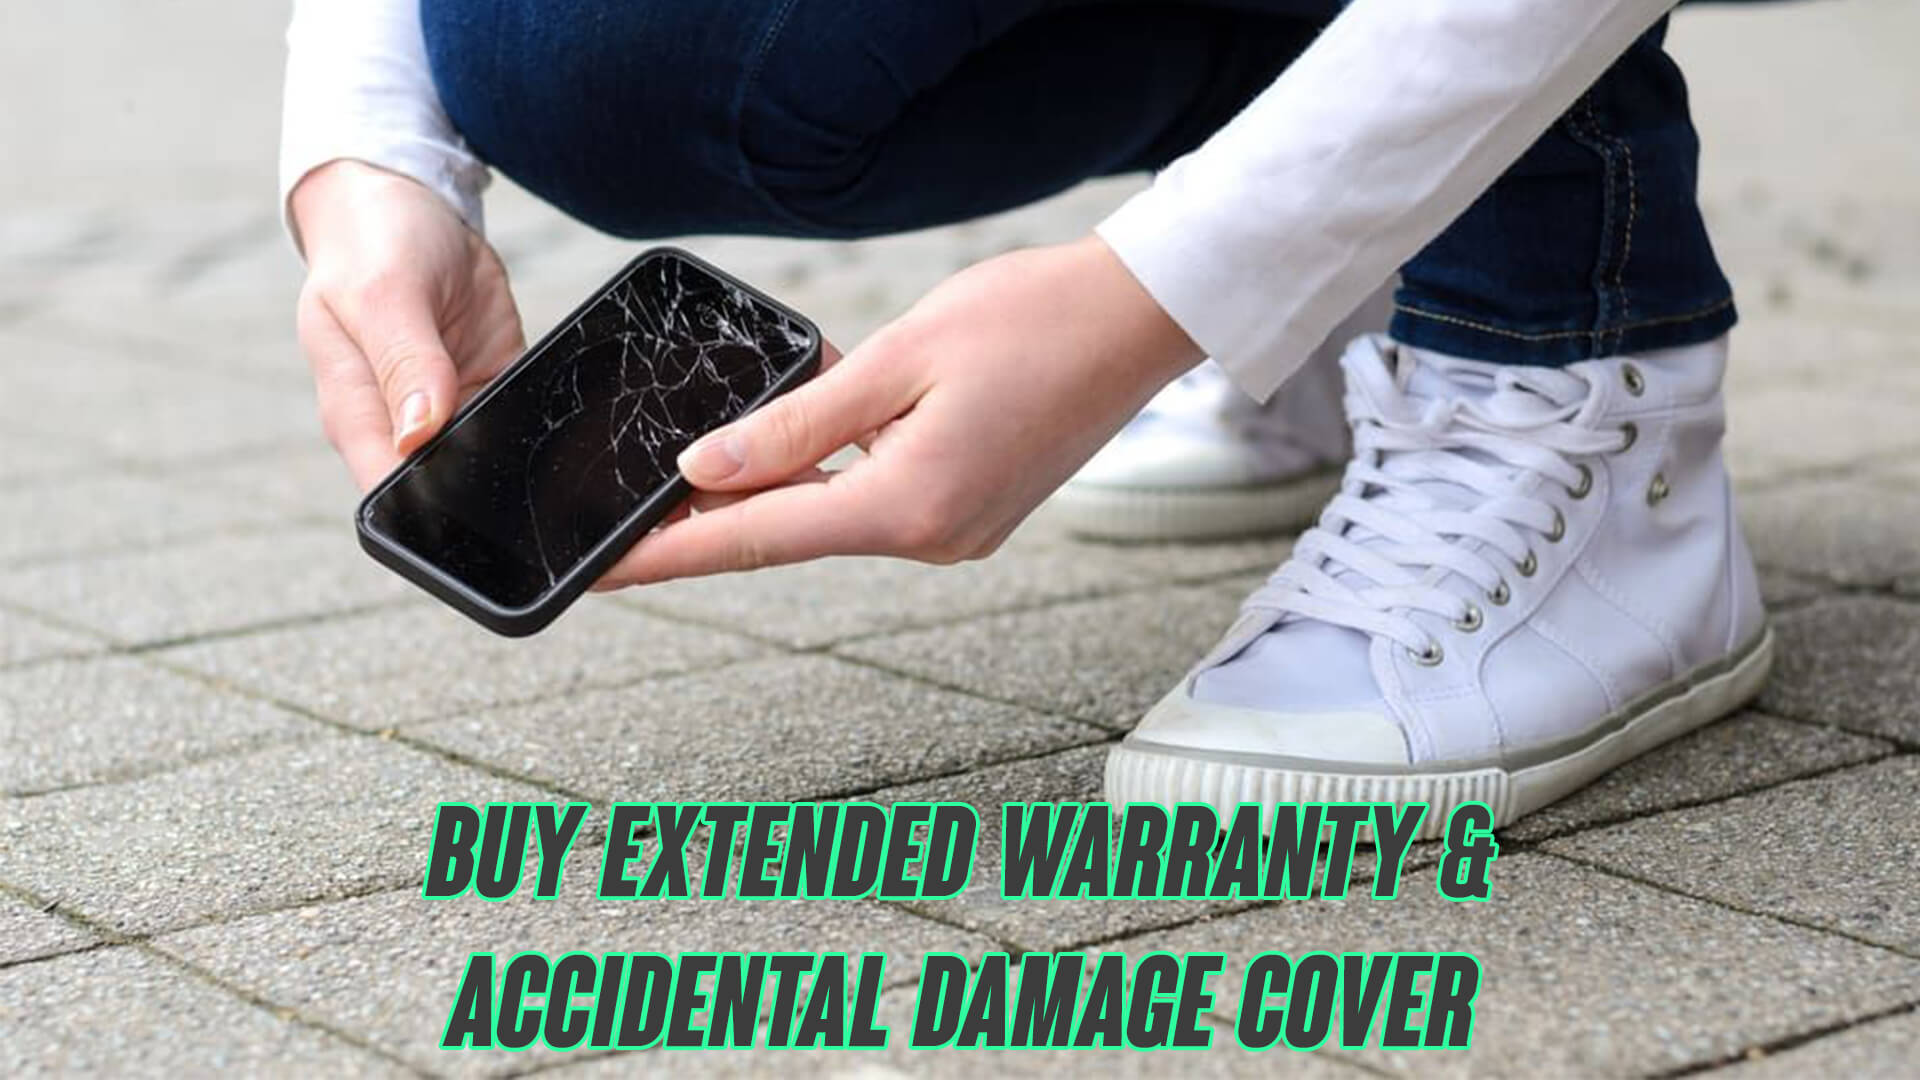 Smartphone Accidental Damage Cover